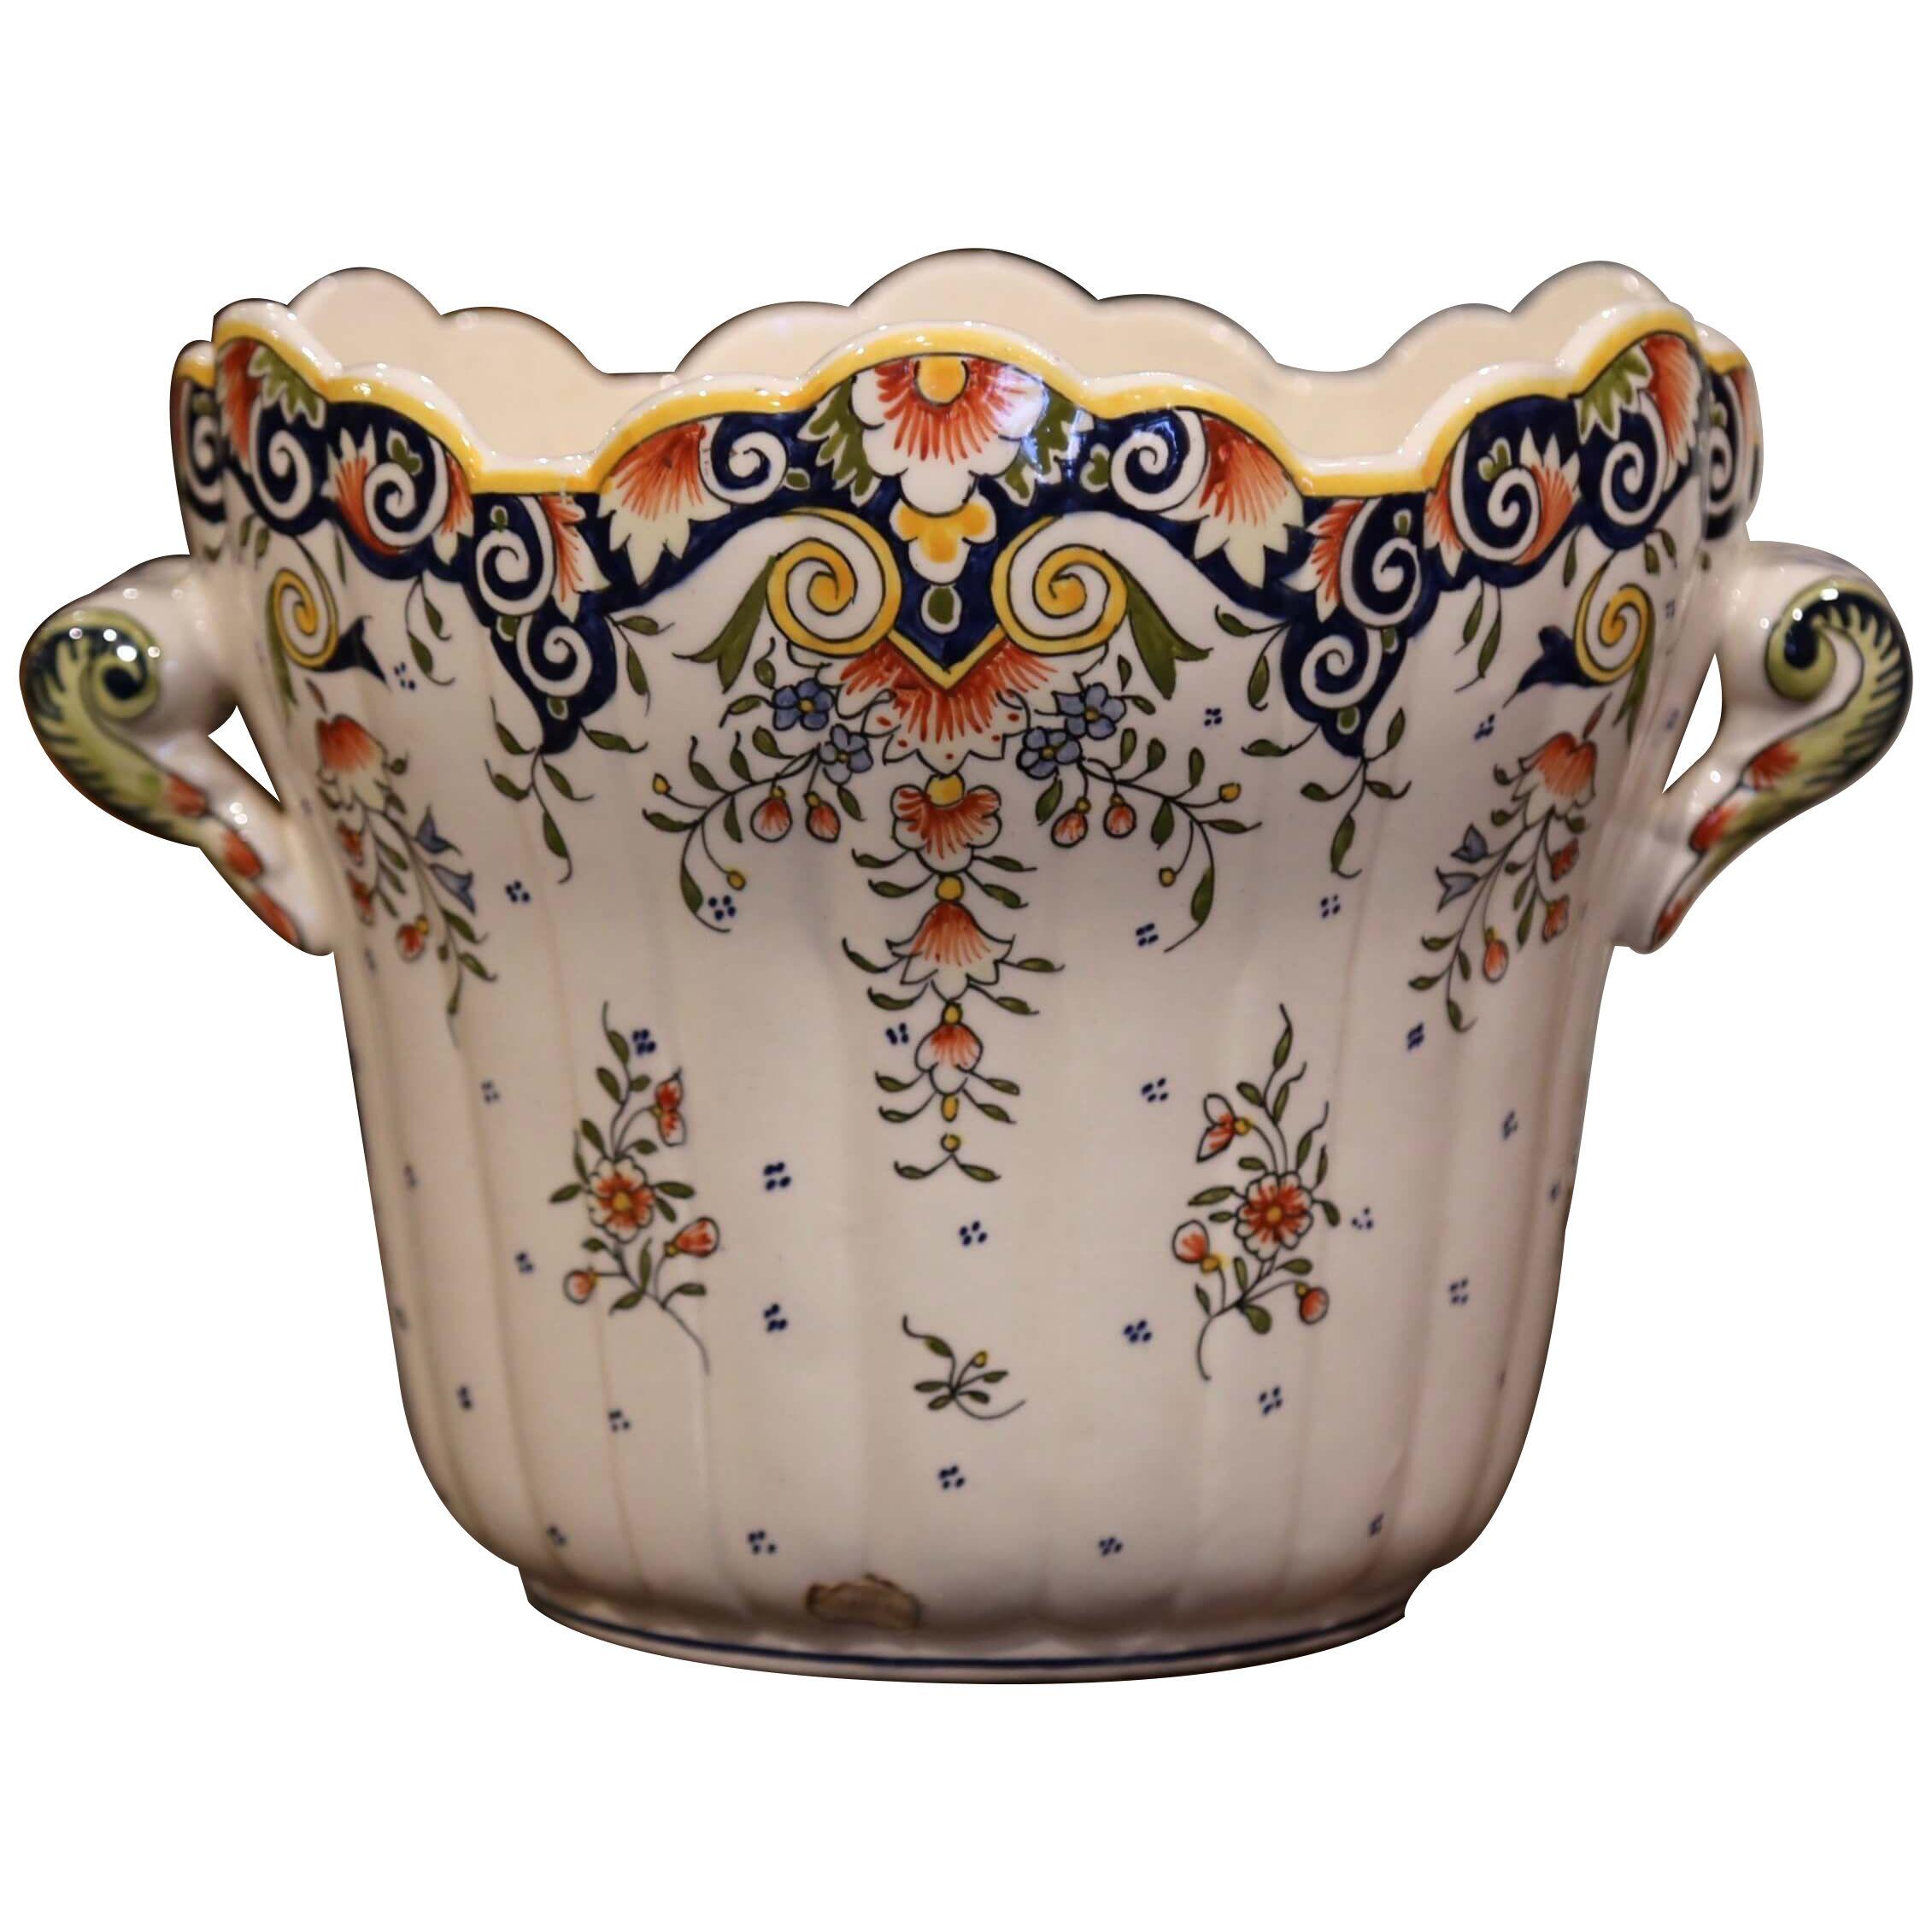 Early 20th Century French Hand-Painted Faience Planter with Handles from Rouen